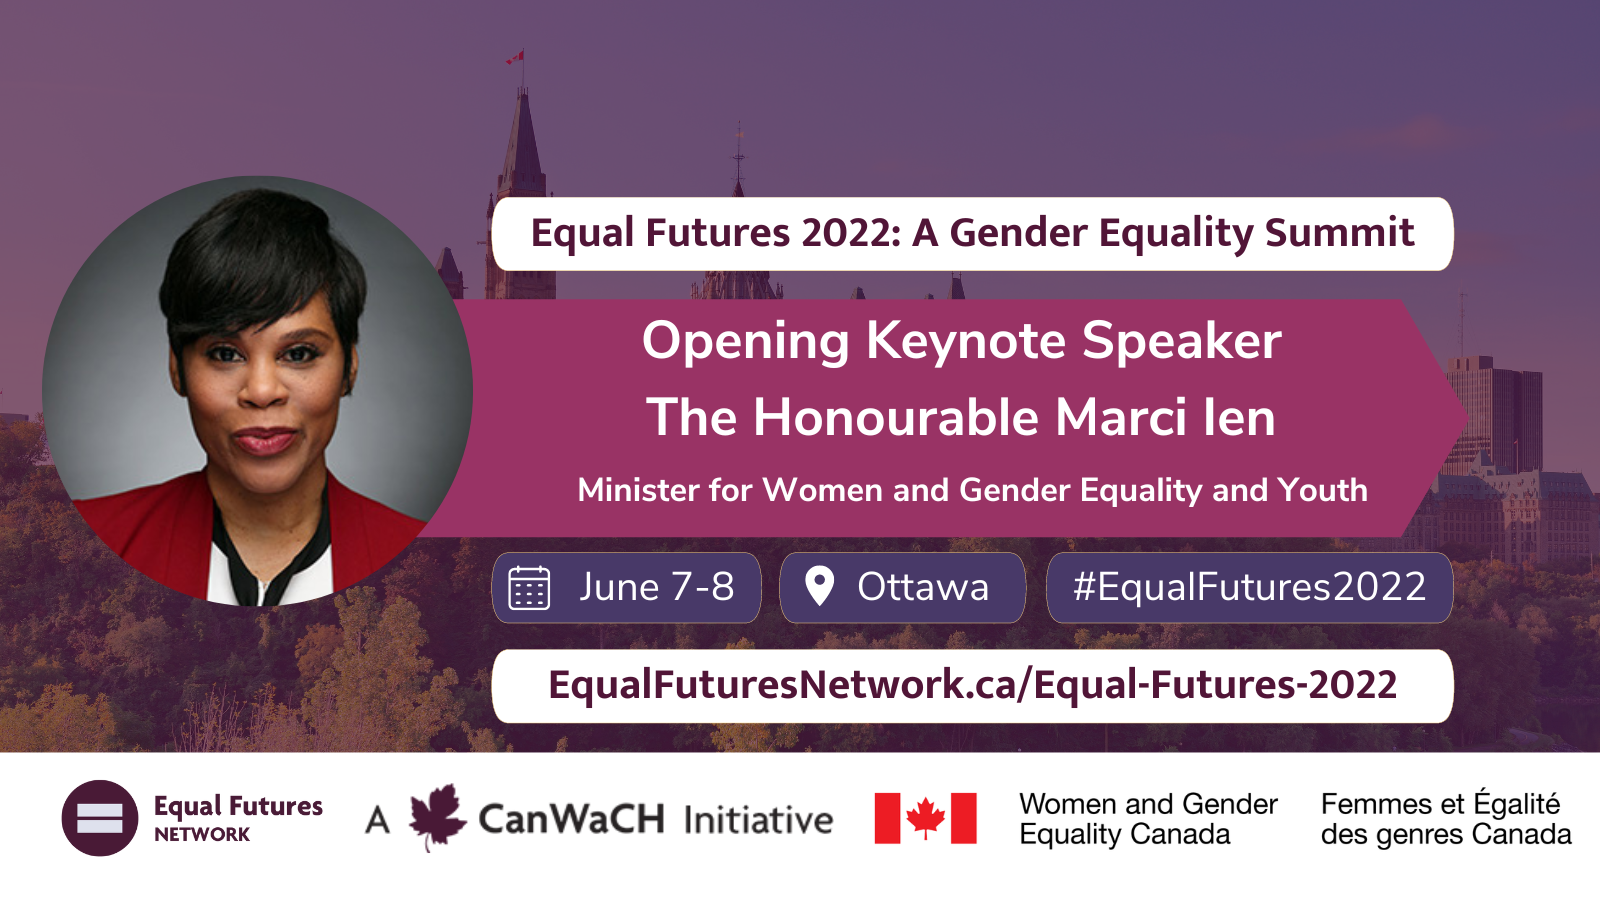 Announcing the Honourable Marci Ien as Opening Keynote Speaker at Equal Futures 2022: A Gender Equality Summit